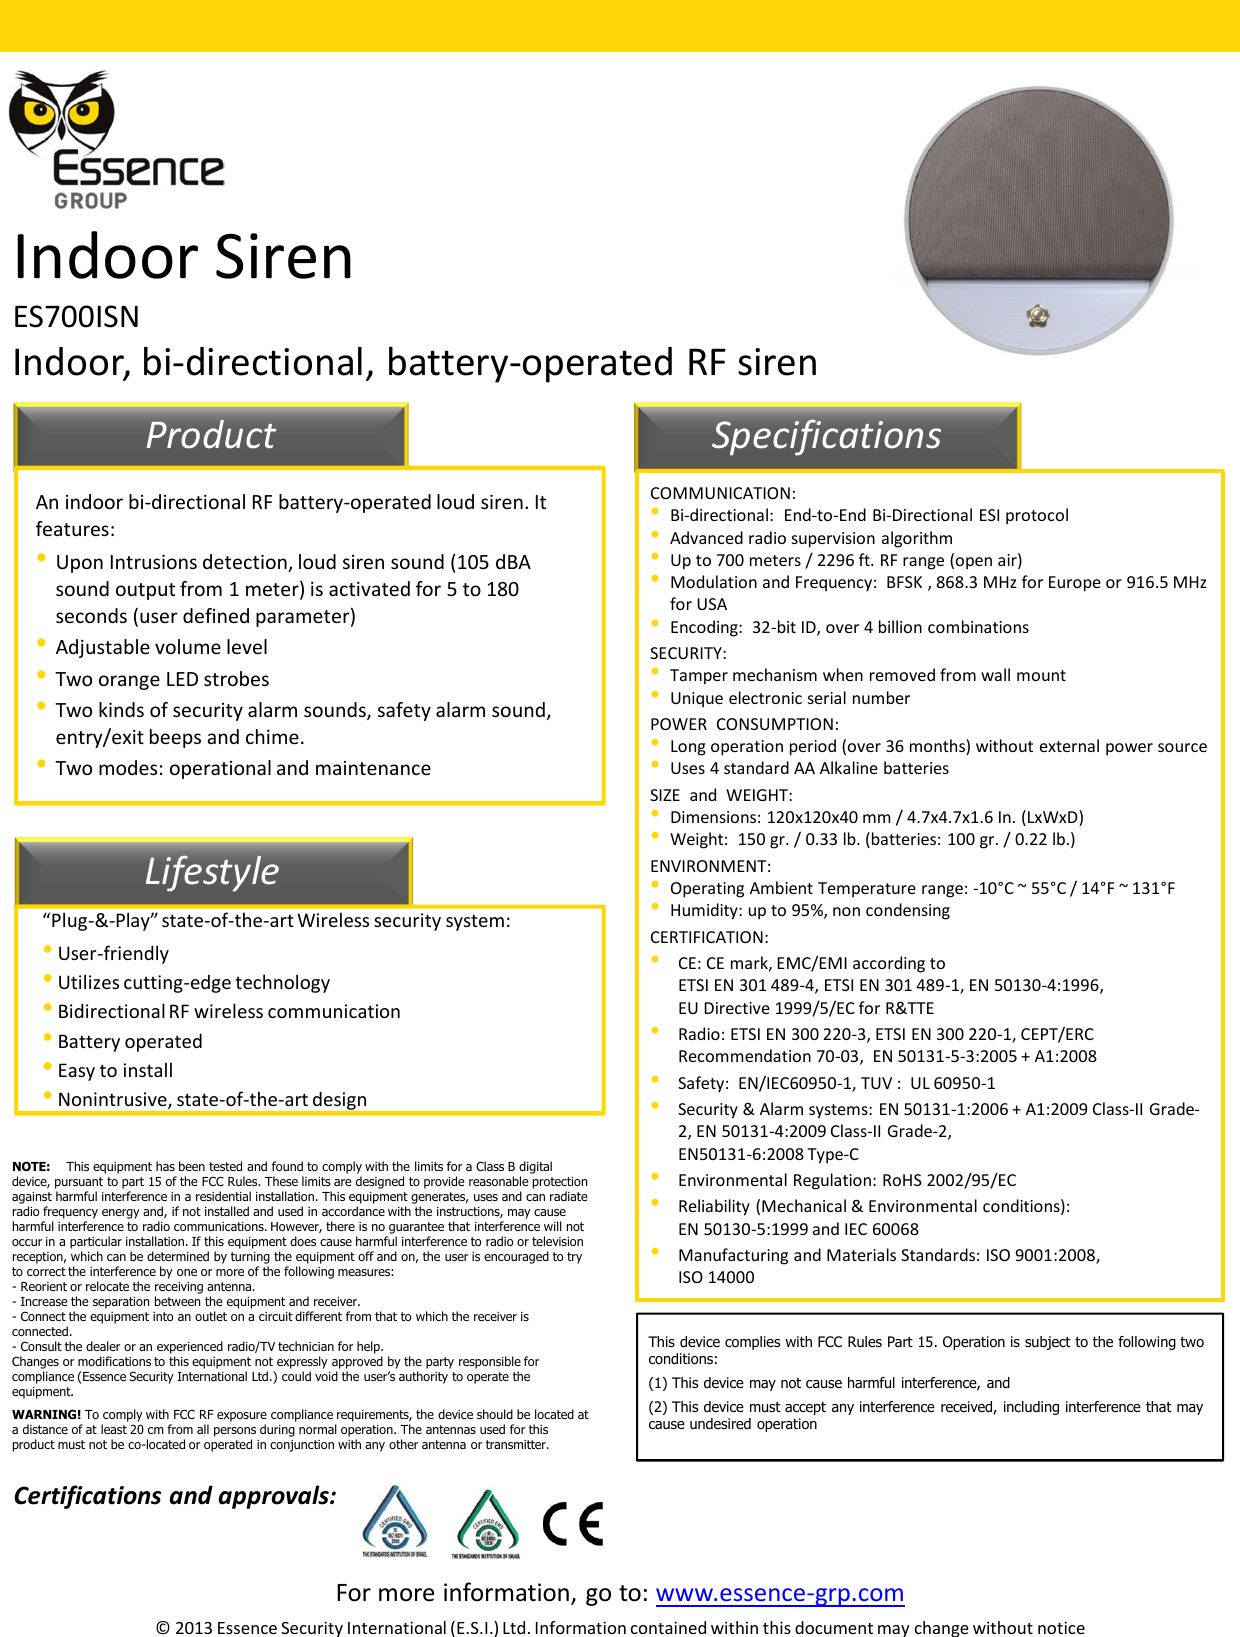 For more information, go to: www.essence-grp.com© 2013 Essence Security International (E.S.I.) Ltd. Information contained within this document may change without noticeIndoor SirenES700ISNIndoor, bi-directional, battery-operated RF siren11LifestyleProduct SpecificationsAn indoor bi-directional RF battery-operated loud siren. It features:•Upon Intrusions detection, loud siren sound (105 dBAsound output from 1 meter) is activated for 5 to 180 seconds (user defined parameter)•Adjustable volume level•Two orange LED strobes•Two kinds of security alarm sounds, safety alarm sound, entry/exit beeps and chime.•Two modes: operational and maintenance “Plug-&amp;-Play” state-of-the-art Wireless security system:•User-friendly•Utilizes cutting-edge technology•Bidirectional RF wireless communication•Battery operated•Easy to install•Nonintrusive, state-of-the-art designCOMMUNICATION:•Bi-directional:  End-to-End Bi-Directional ESI protocol•Advanced radio supervision algorithm•Up to 700 meters / 2296 ft. RF range (open air)•Modulation and Frequency:  BFSK , 868.3 MHz for Europe or 916.5 MHz for USA•Encoding:  32-bit ID, over 4 billion combinationsSECURITY:•Tamper mechanism when removed from wall mount•Unique electronic serial numberPOWER  CONSUMPTION:•Long operation period (over 36 months) without external power source•Uses 4 standard AA Alkaline batteriesSIZE  and  WEIGHT: •Dimensions: 120x120x40 mm / 4.7x4.7x1.6 In. (LxWxD) •Weight:  150 gr. / 0.33 lb. (batteries: 100 gr. / 0.22 lb.) ENVIRONMENT:•Operating Ambient Temperature range: -10°C ~ 55°C / 14°F ~ 131°F •Humidity: up to 95%, non condensing CERTIFICATION:•CE: CE mark, EMC/EMI according to ETSI EN 301 489-4, ETSI EN 301 489-1, EN 50130-4:1996,EU Directive 1999/5/EC for R&amp;TTE •Radio: ETSI EN 300 220-3, ETSI EN 300 220-1, CEPT/ERC Recommendation 70-03,  EN 50131-5-3:2005 + A1:2008 •Safety:  EN/IEC60950-1, TUV :  UL 60950-1 •Security &amp; Alarm systems: EN 50131-1:2006 + A1:2009 Class-II Grade-2, EN 50131-4:2009 Class-II Grade-2, EN50131-6:2008 Type-C•Environmental Regulation: RoHS 2002/95/EC•Reliability (Mechanical &amp; Environmental conditions):  EN 50130-5:1999 and IEC 60068•Manufacturing and Materials Standards: ISO 9001:2008, ISO 14000Certifications and approvals:NOTE: This equipment has been tested and found to comply with the limits for a Class B digital device, pursuant to part 15 of the FCC Rules. These limits are designed to provide reasonable protection against harmful interference in a residential installation. This equipment generates, uses and can radiate radio frequency energy and, if not installed and used in accordance with the instructions, may cause harmful interference to radio communications. However, there is no guarantee that interference will not occur in a particular installation. If this equipment does cause harmful interference to radio or television reception, which can be determined by turning the equipment off and on, the user is encouraged to try to correct the interference by one or more of the following measures: - Reorient or relocate the receiving antenna.- Increase the separation between the equipment and receiver.- Connect the equipment into an outlet on a circuit different from that to which the receiver is connected.- Consult the dealer or an experienced radio/TV technician for help.Changes or modifications to this equipment not expressly approved by the party responsible for compliance (Essence Security International Ltd.) could void the user’s authority to operate the equipment.WARNING! To comply with FCC RF exposure compliance requirements, the device should be located at a distance of at least 20 cm from all persons during normal operation. The antennas used for this product must not be co-located or operated in conjunction with any other antenna or transmitter.This device complies with FCC Rules Part 15. Operation is subject to the following twoconditions:(1) This device may not cause harmful interference, and(2) This device must accept any interference received, including interference that maycause undesired operation